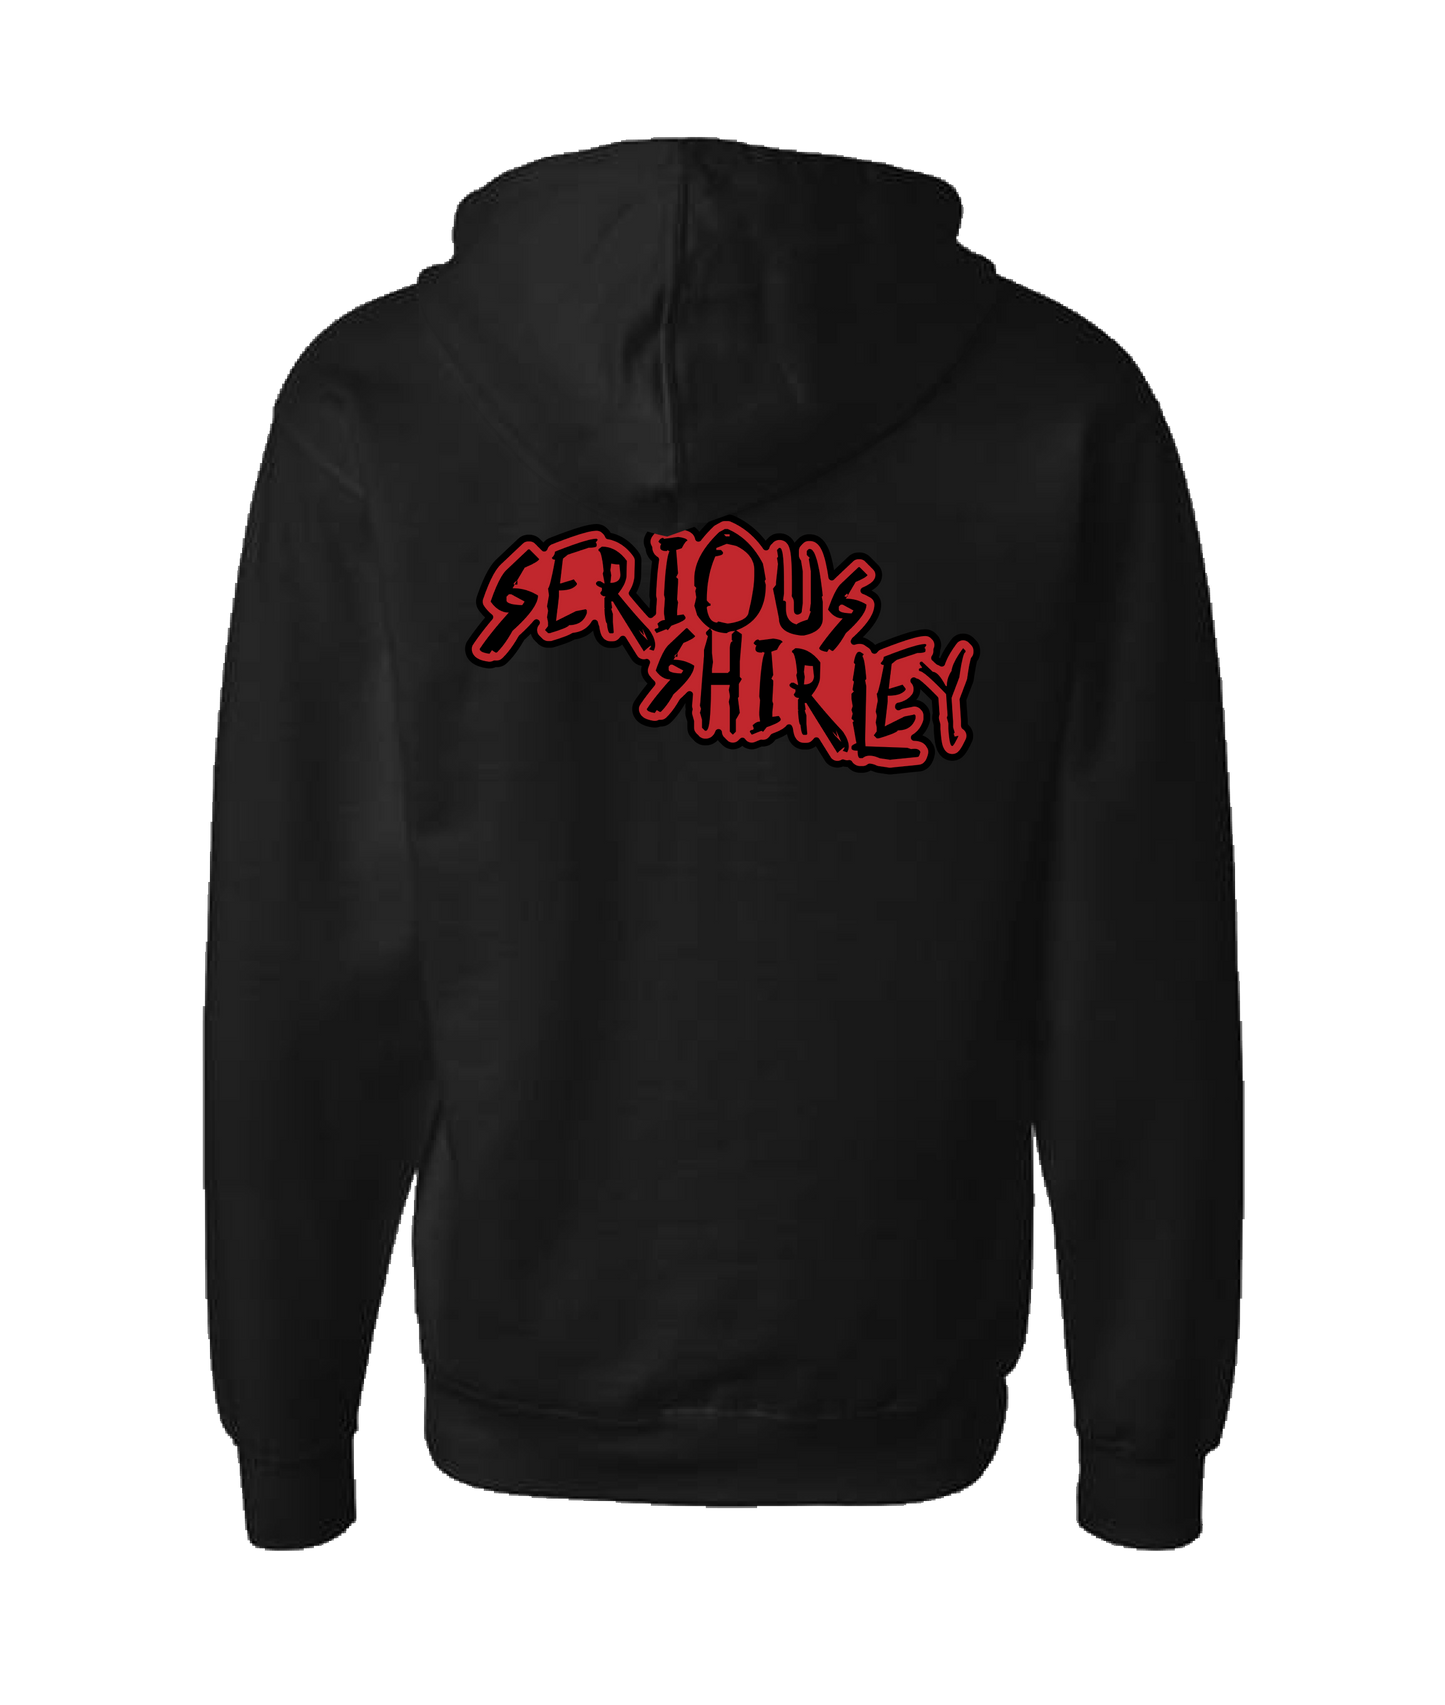 Serious Shirley - Red Scratch - Black Zip Up Hoodie